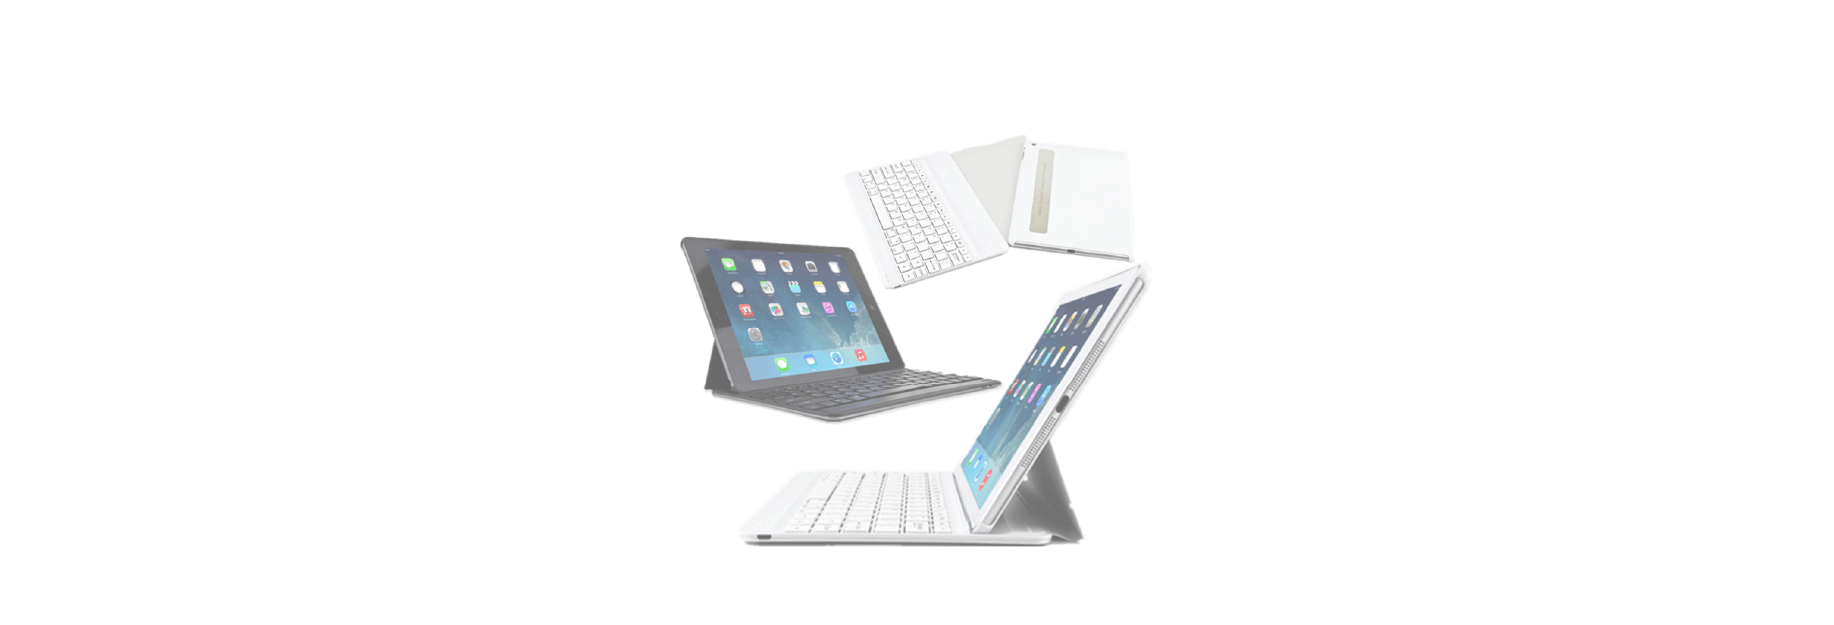 How to pair a Bluetooth keyboard with your iPad